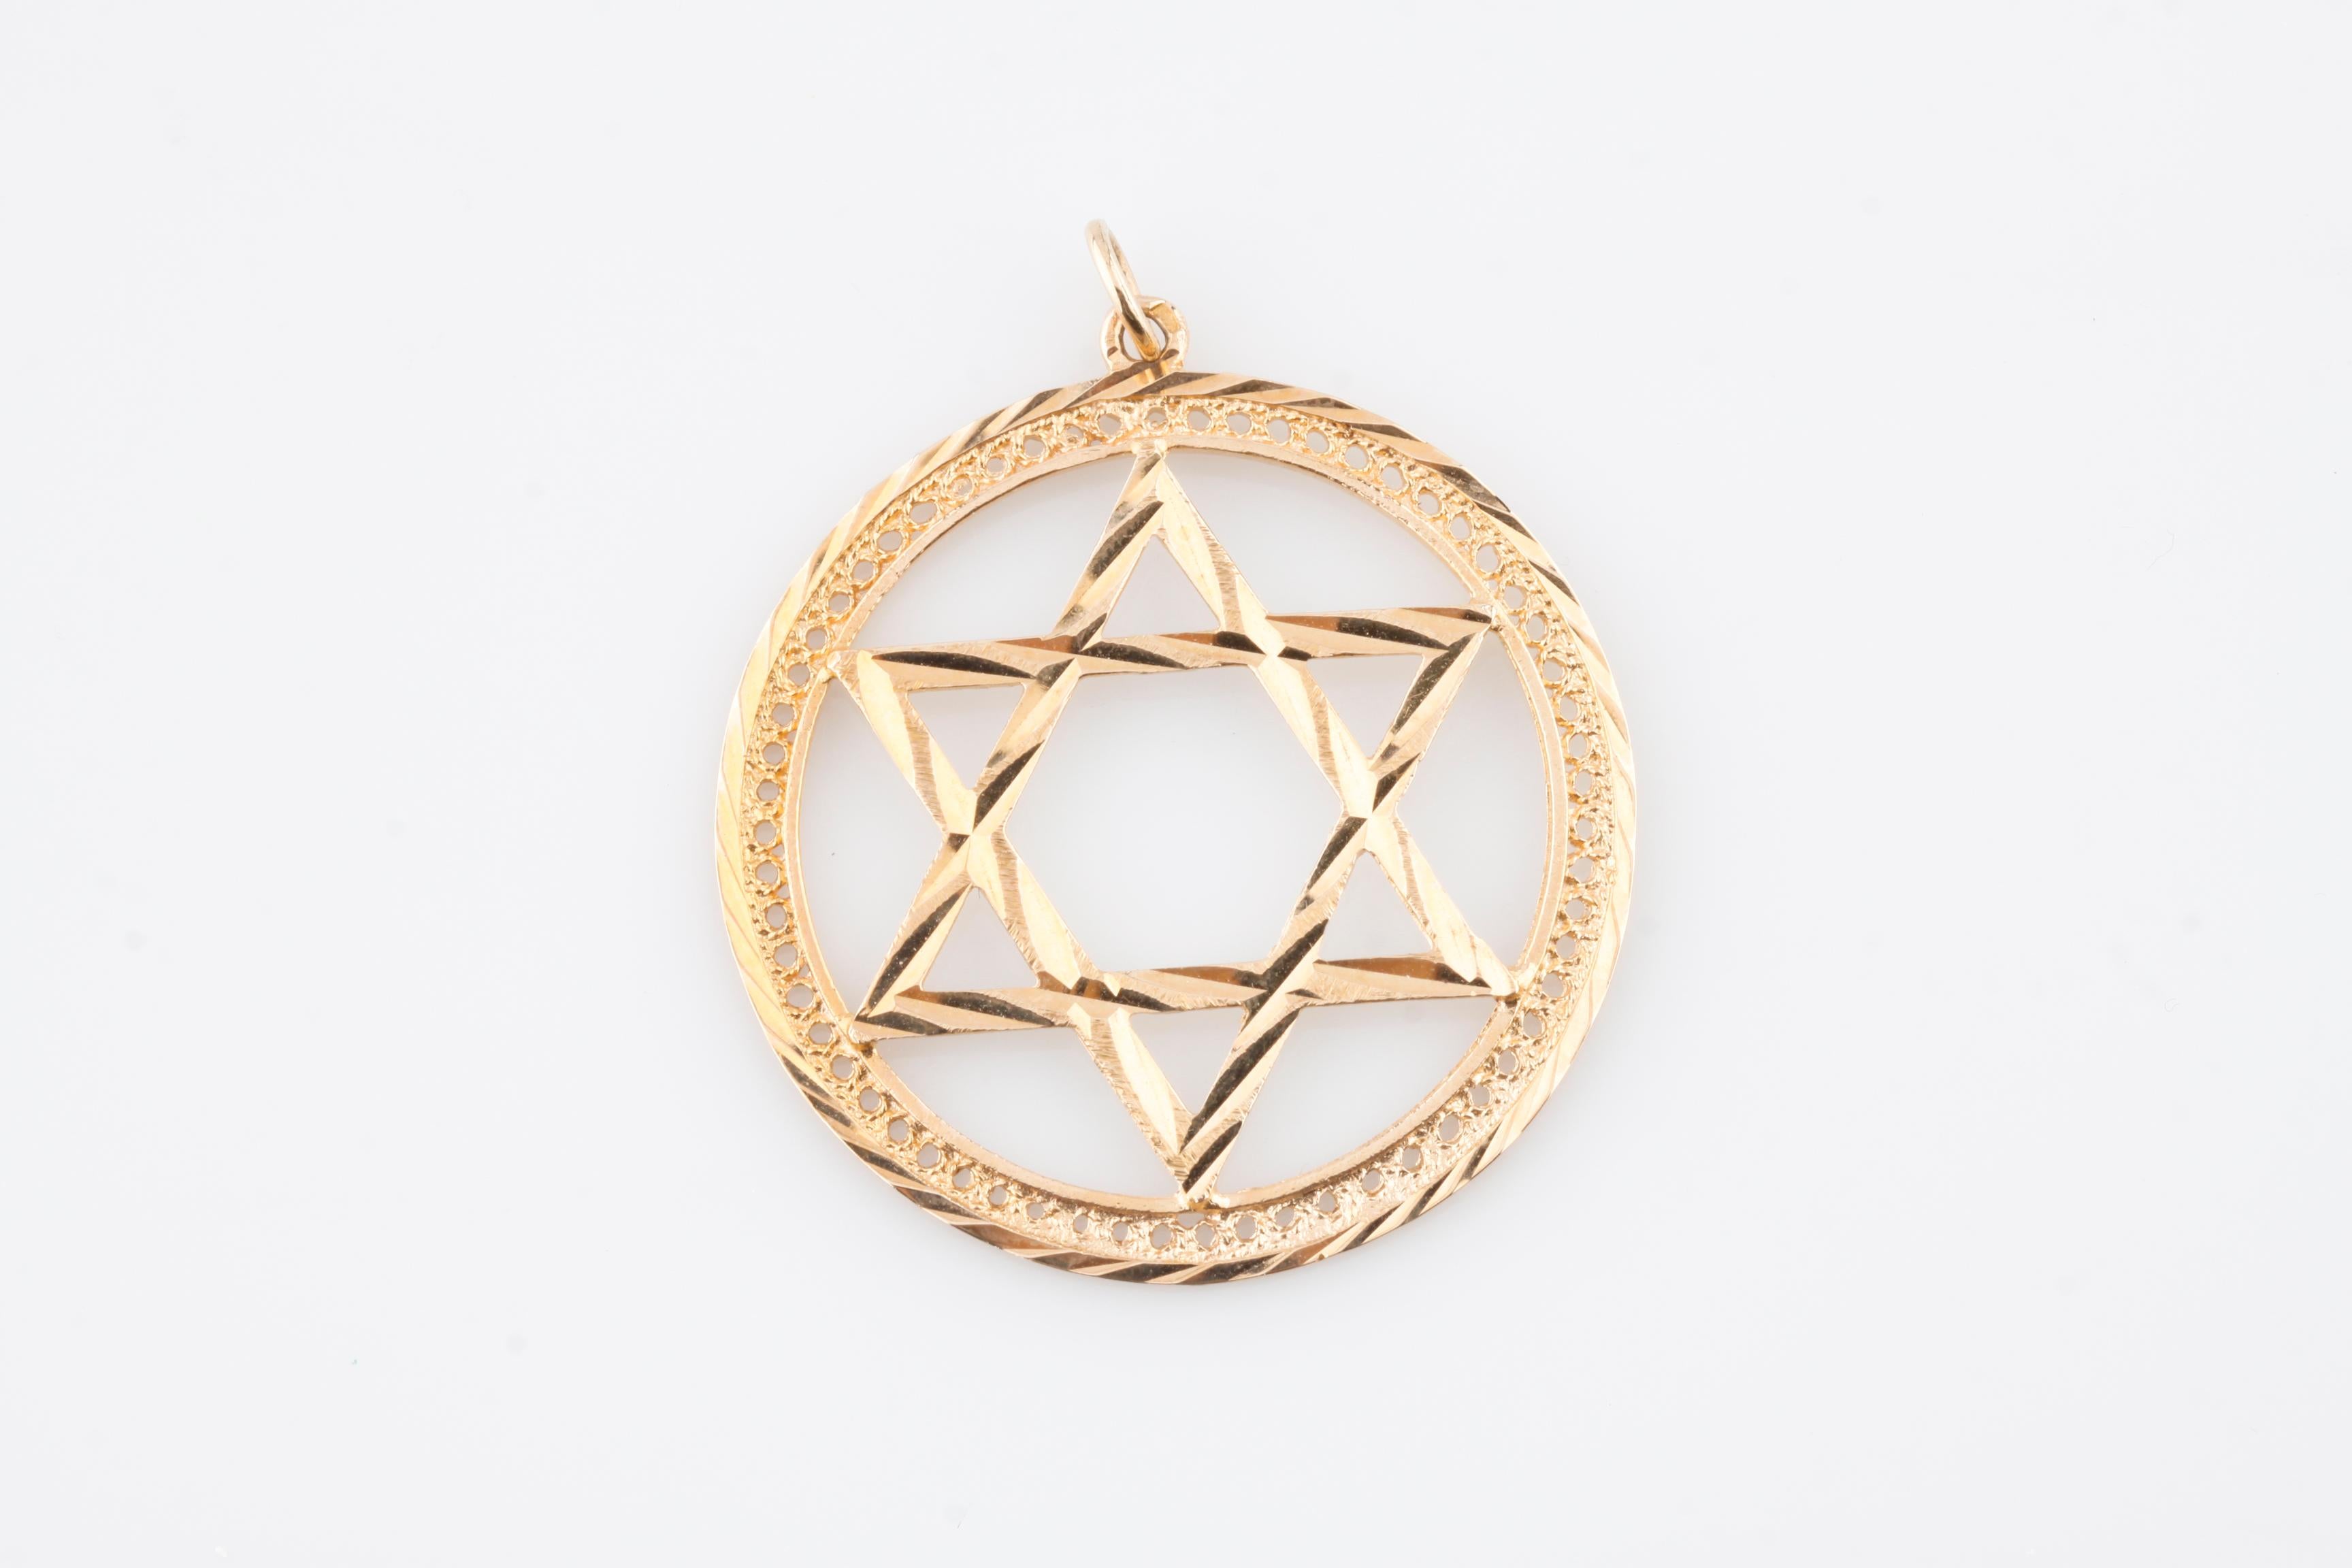 Gorgeous Star of David Pendant 
Reversible Design Features Different Textures on Both Sides
Diameter of Pendant = 40 mm
Total Mass = 5.9 grams
Gorgeous Gift!